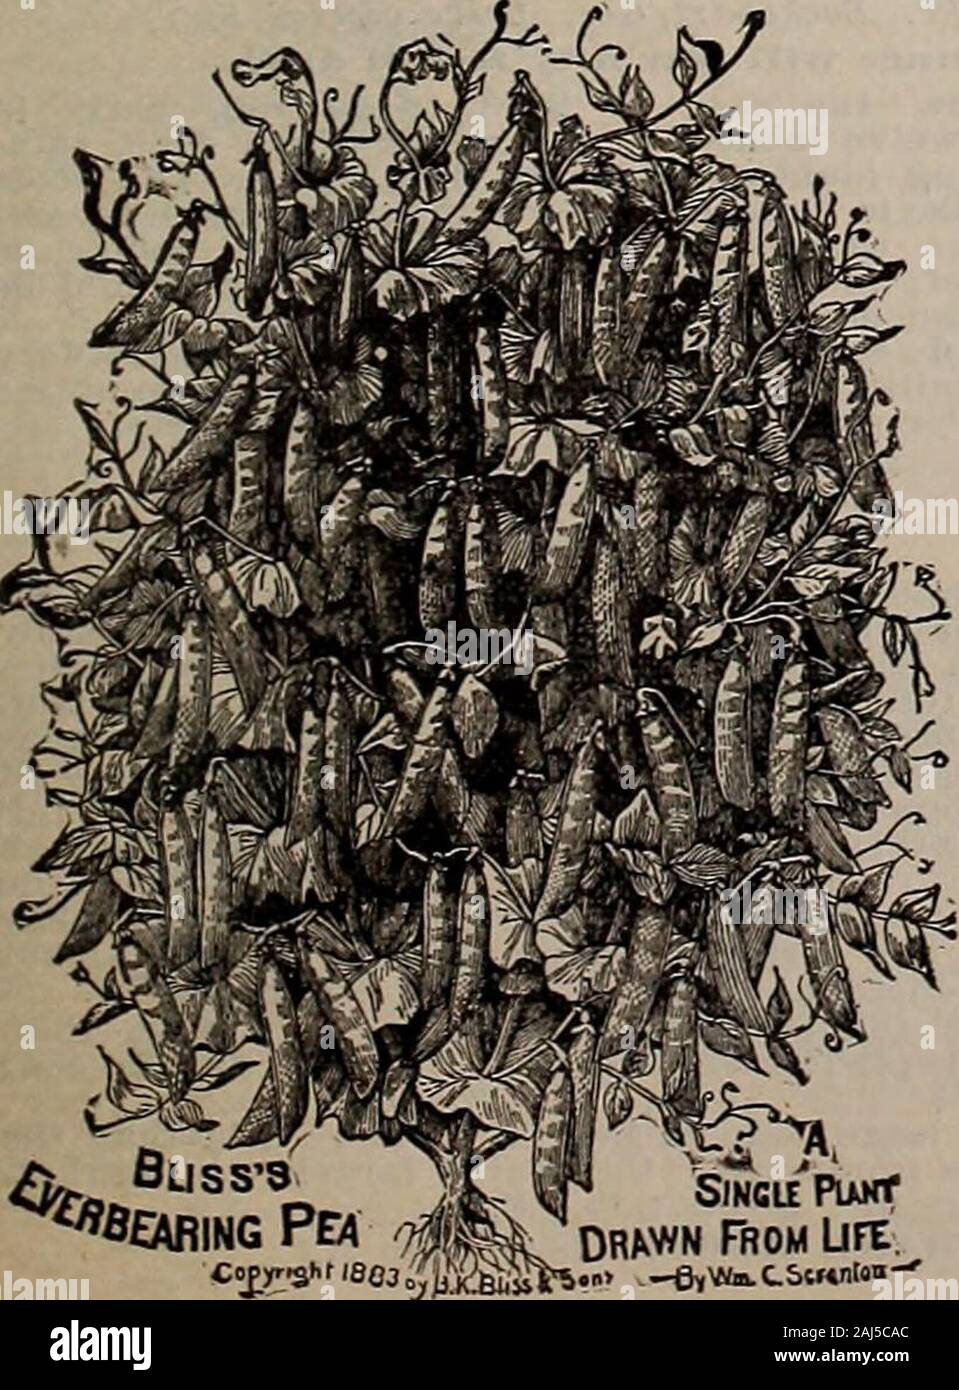 W.W Rawson & Co seedsmen / W.W Rawson & Co. . Improved Stratagem. -Long,^ round pods, closely filled with large pkt wrinkled peas, of extra fine quality, and very pro-Well worthy of general cultivation 15 cts.; qt., 25 cts.; peck, $1.15. Per 10. PUMPKIN. (Potiron, Fr. Kurhis, Ger. Calahaza, Sp.)One pound will plant from 300 to 3UO hils. /V fiusS3 ^BEAum Pea SINCLE PiakT DR^WN From Lire. - -e,Wta.C.StMnIim- CULTURE. —The common practicethird or fourth hill in the corn-field;each way, four plants to each hill. Small Sugar (see cut).—A fine grained,sweet, and an excellent keeper. Perpkt., 5 cts.; Stock Photo